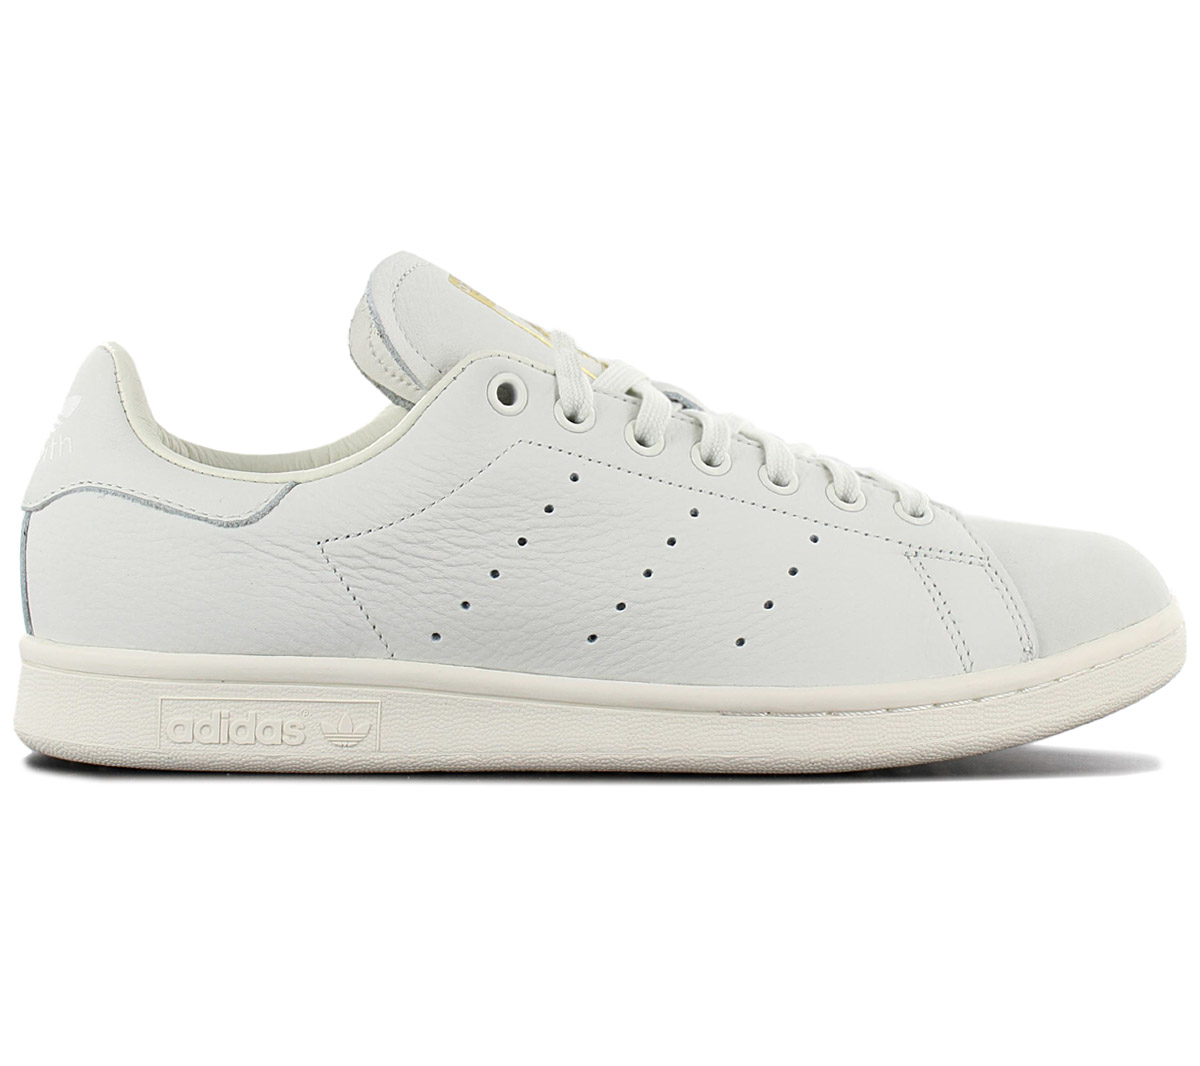 Adidas originals stan smith premium Sneaker B37900 Leather Shoes Sneakers  New | eBay